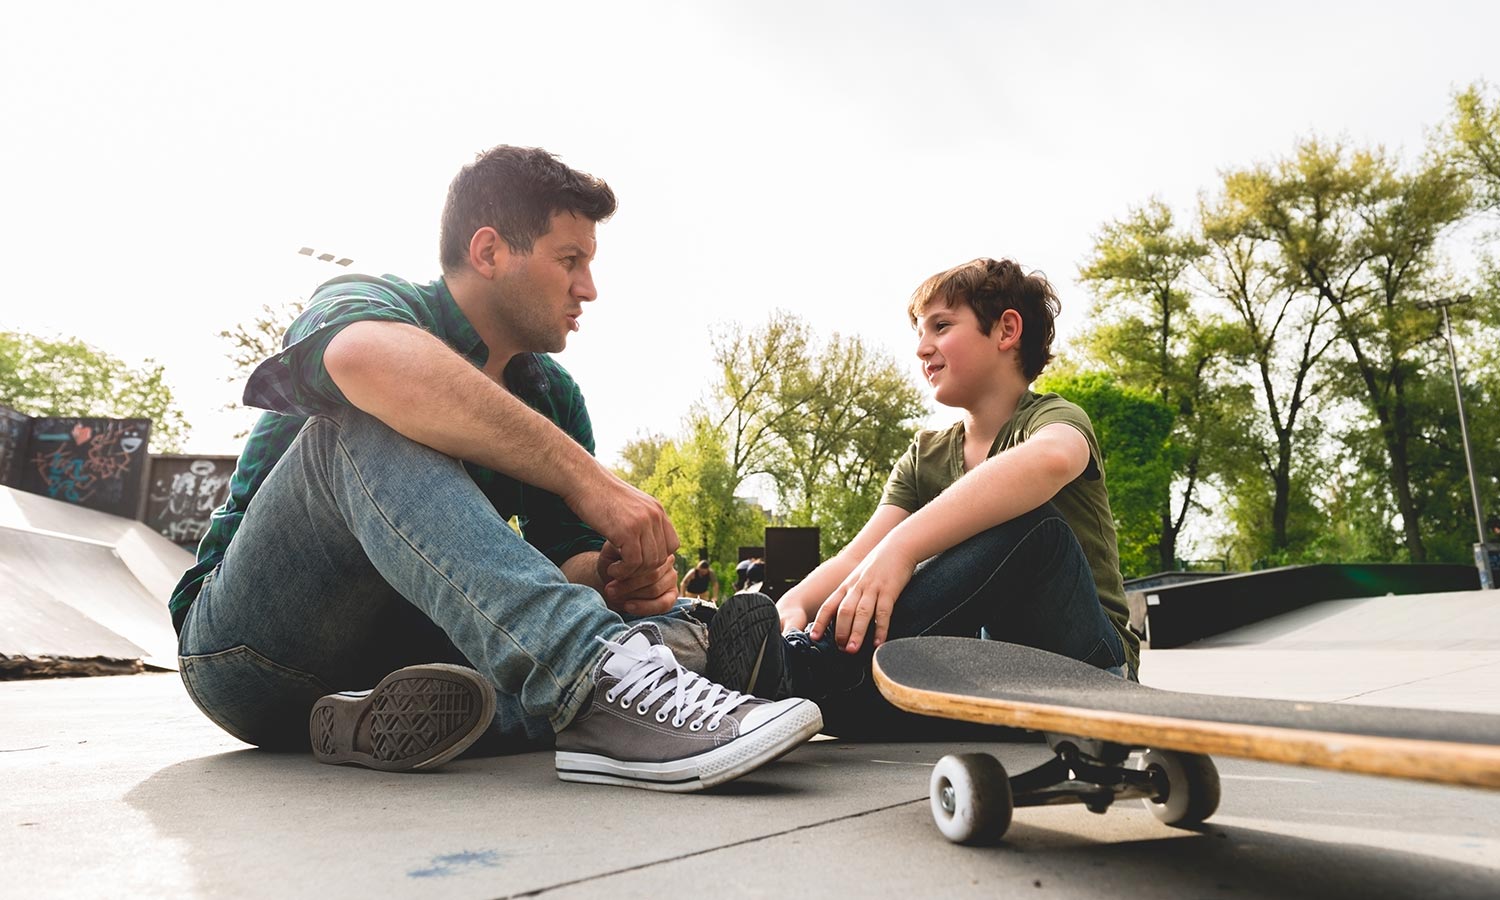 Father having a warm conversation with son at skate park